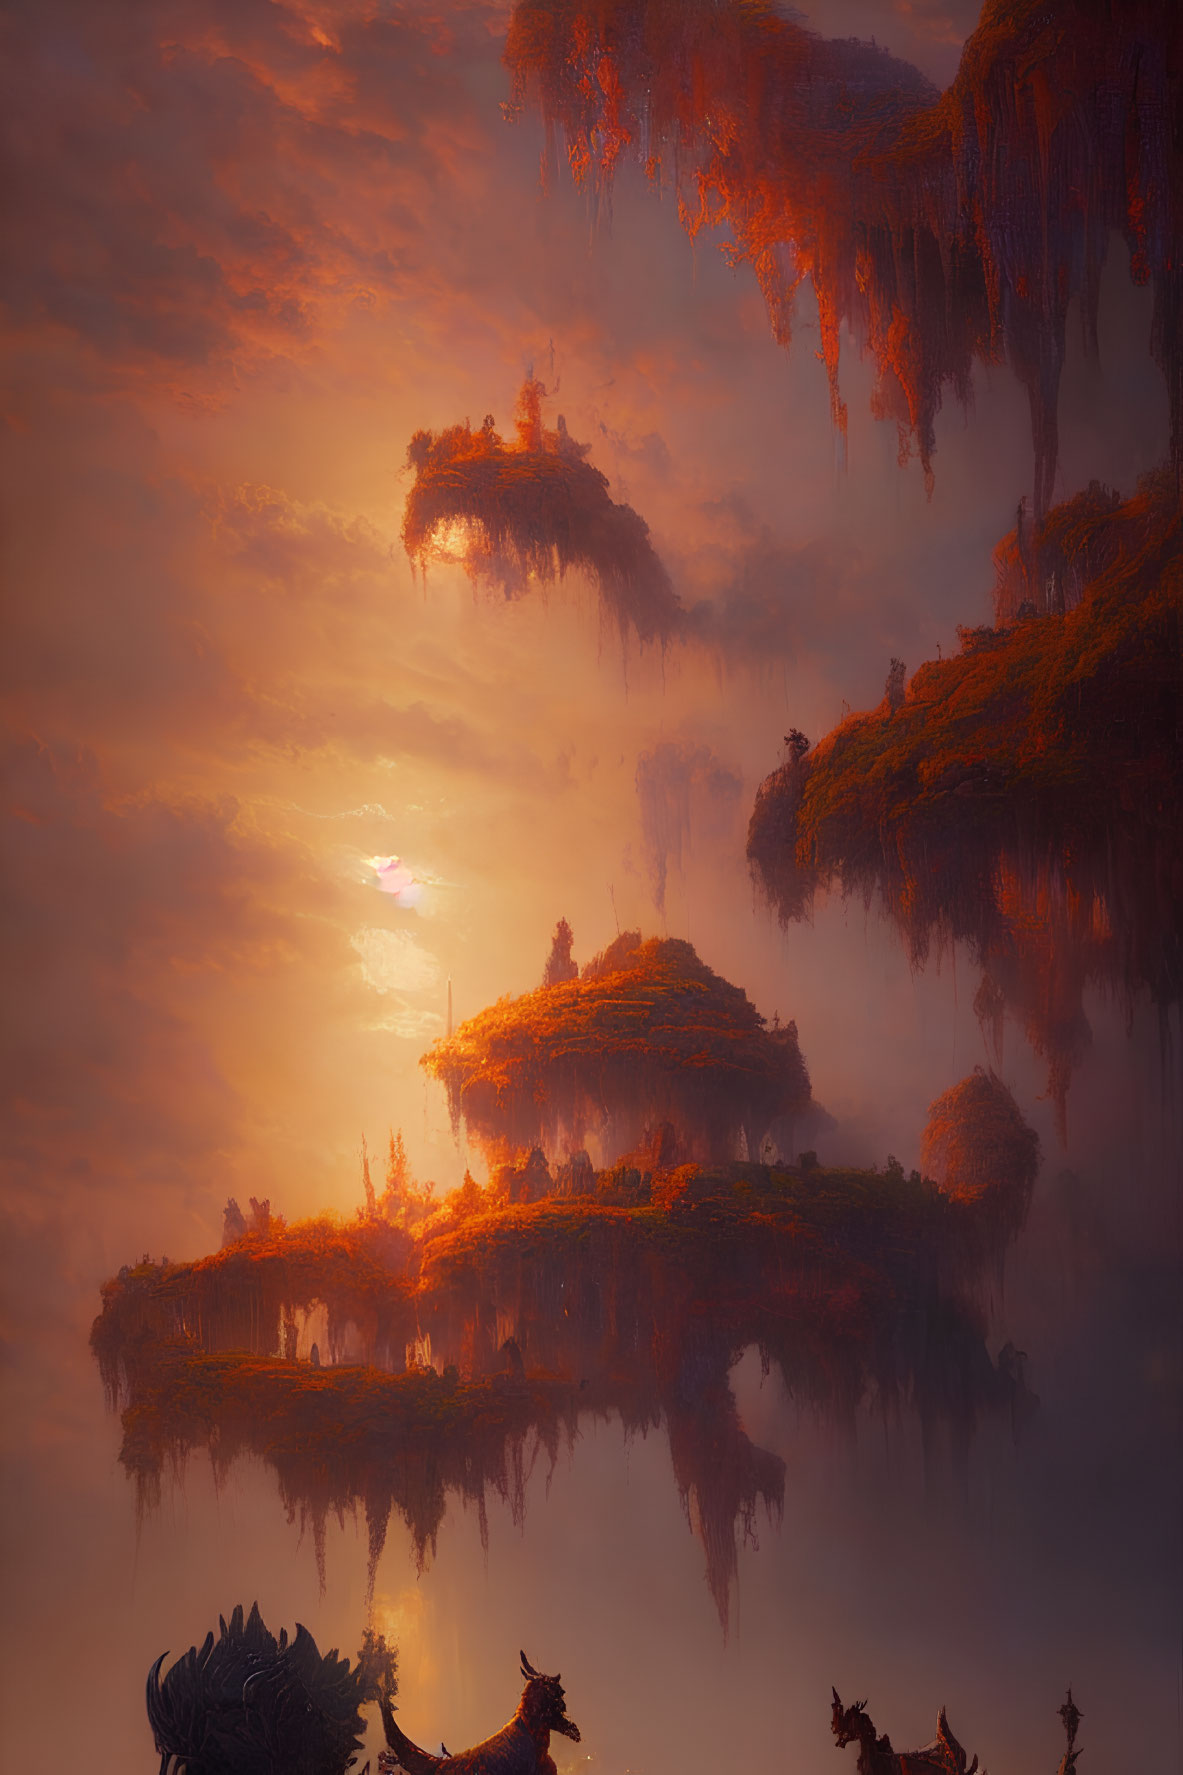 Surreal landscape with floating islands and mystical creatures at twilight